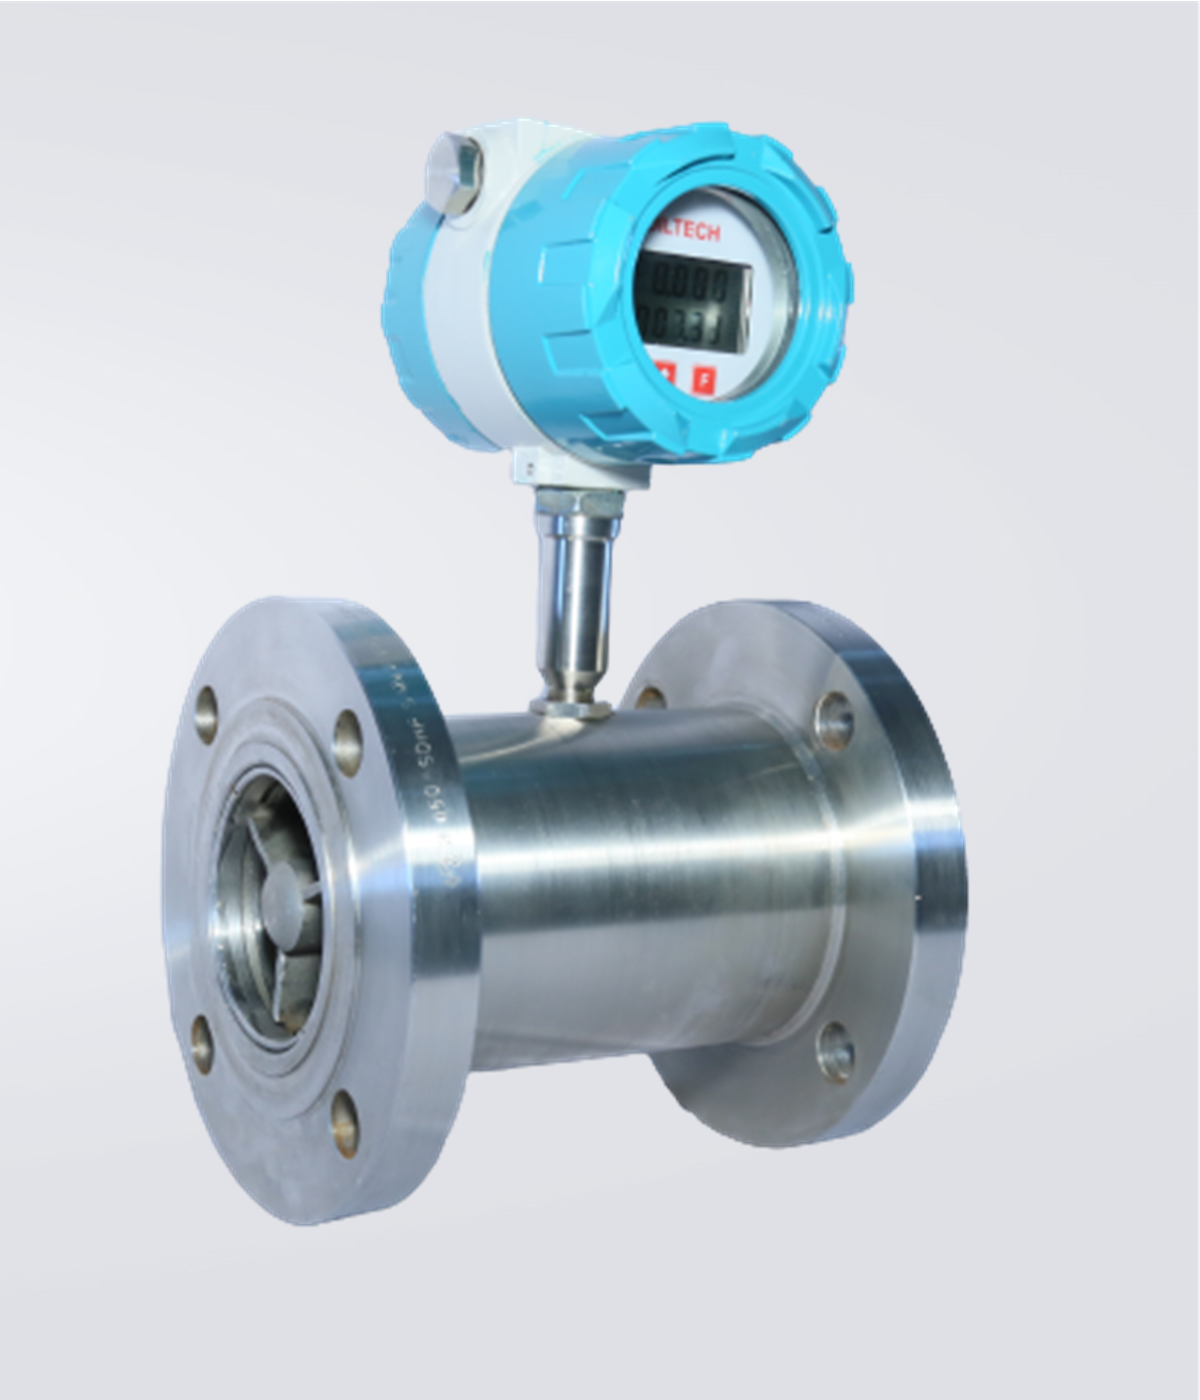 Turbine Flow Meter with Flange connection